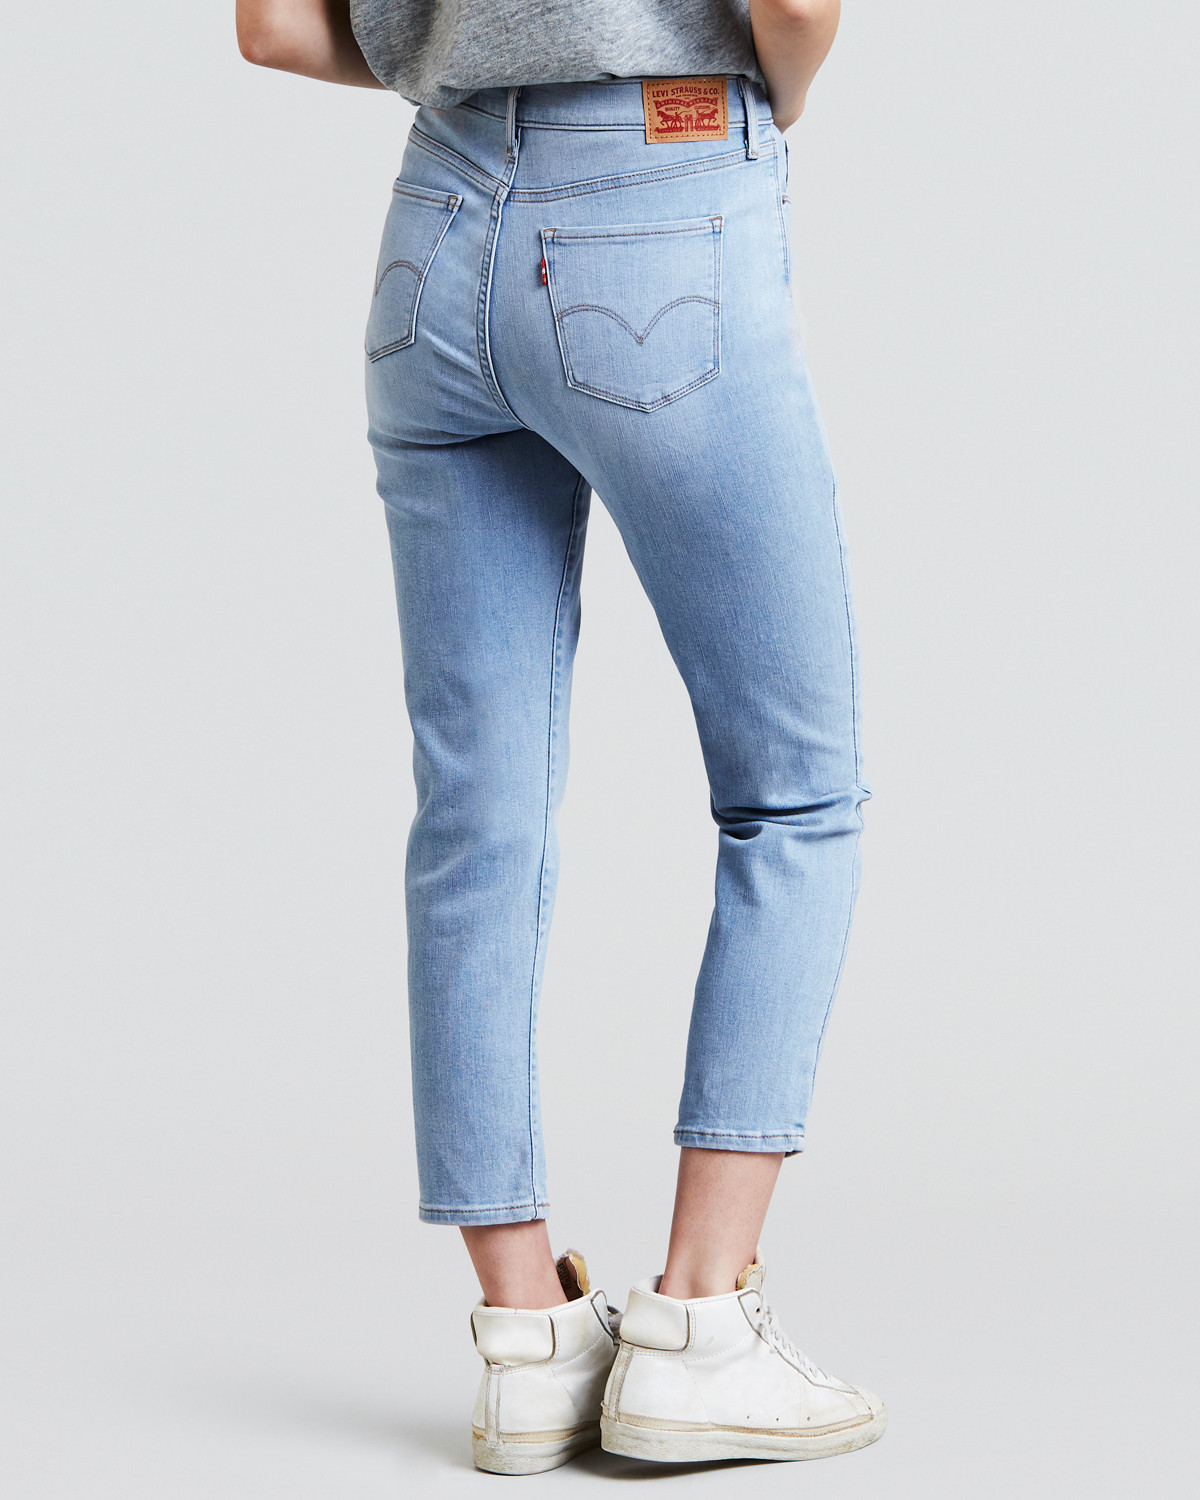 levi's cropped jeans womens Cheaper 